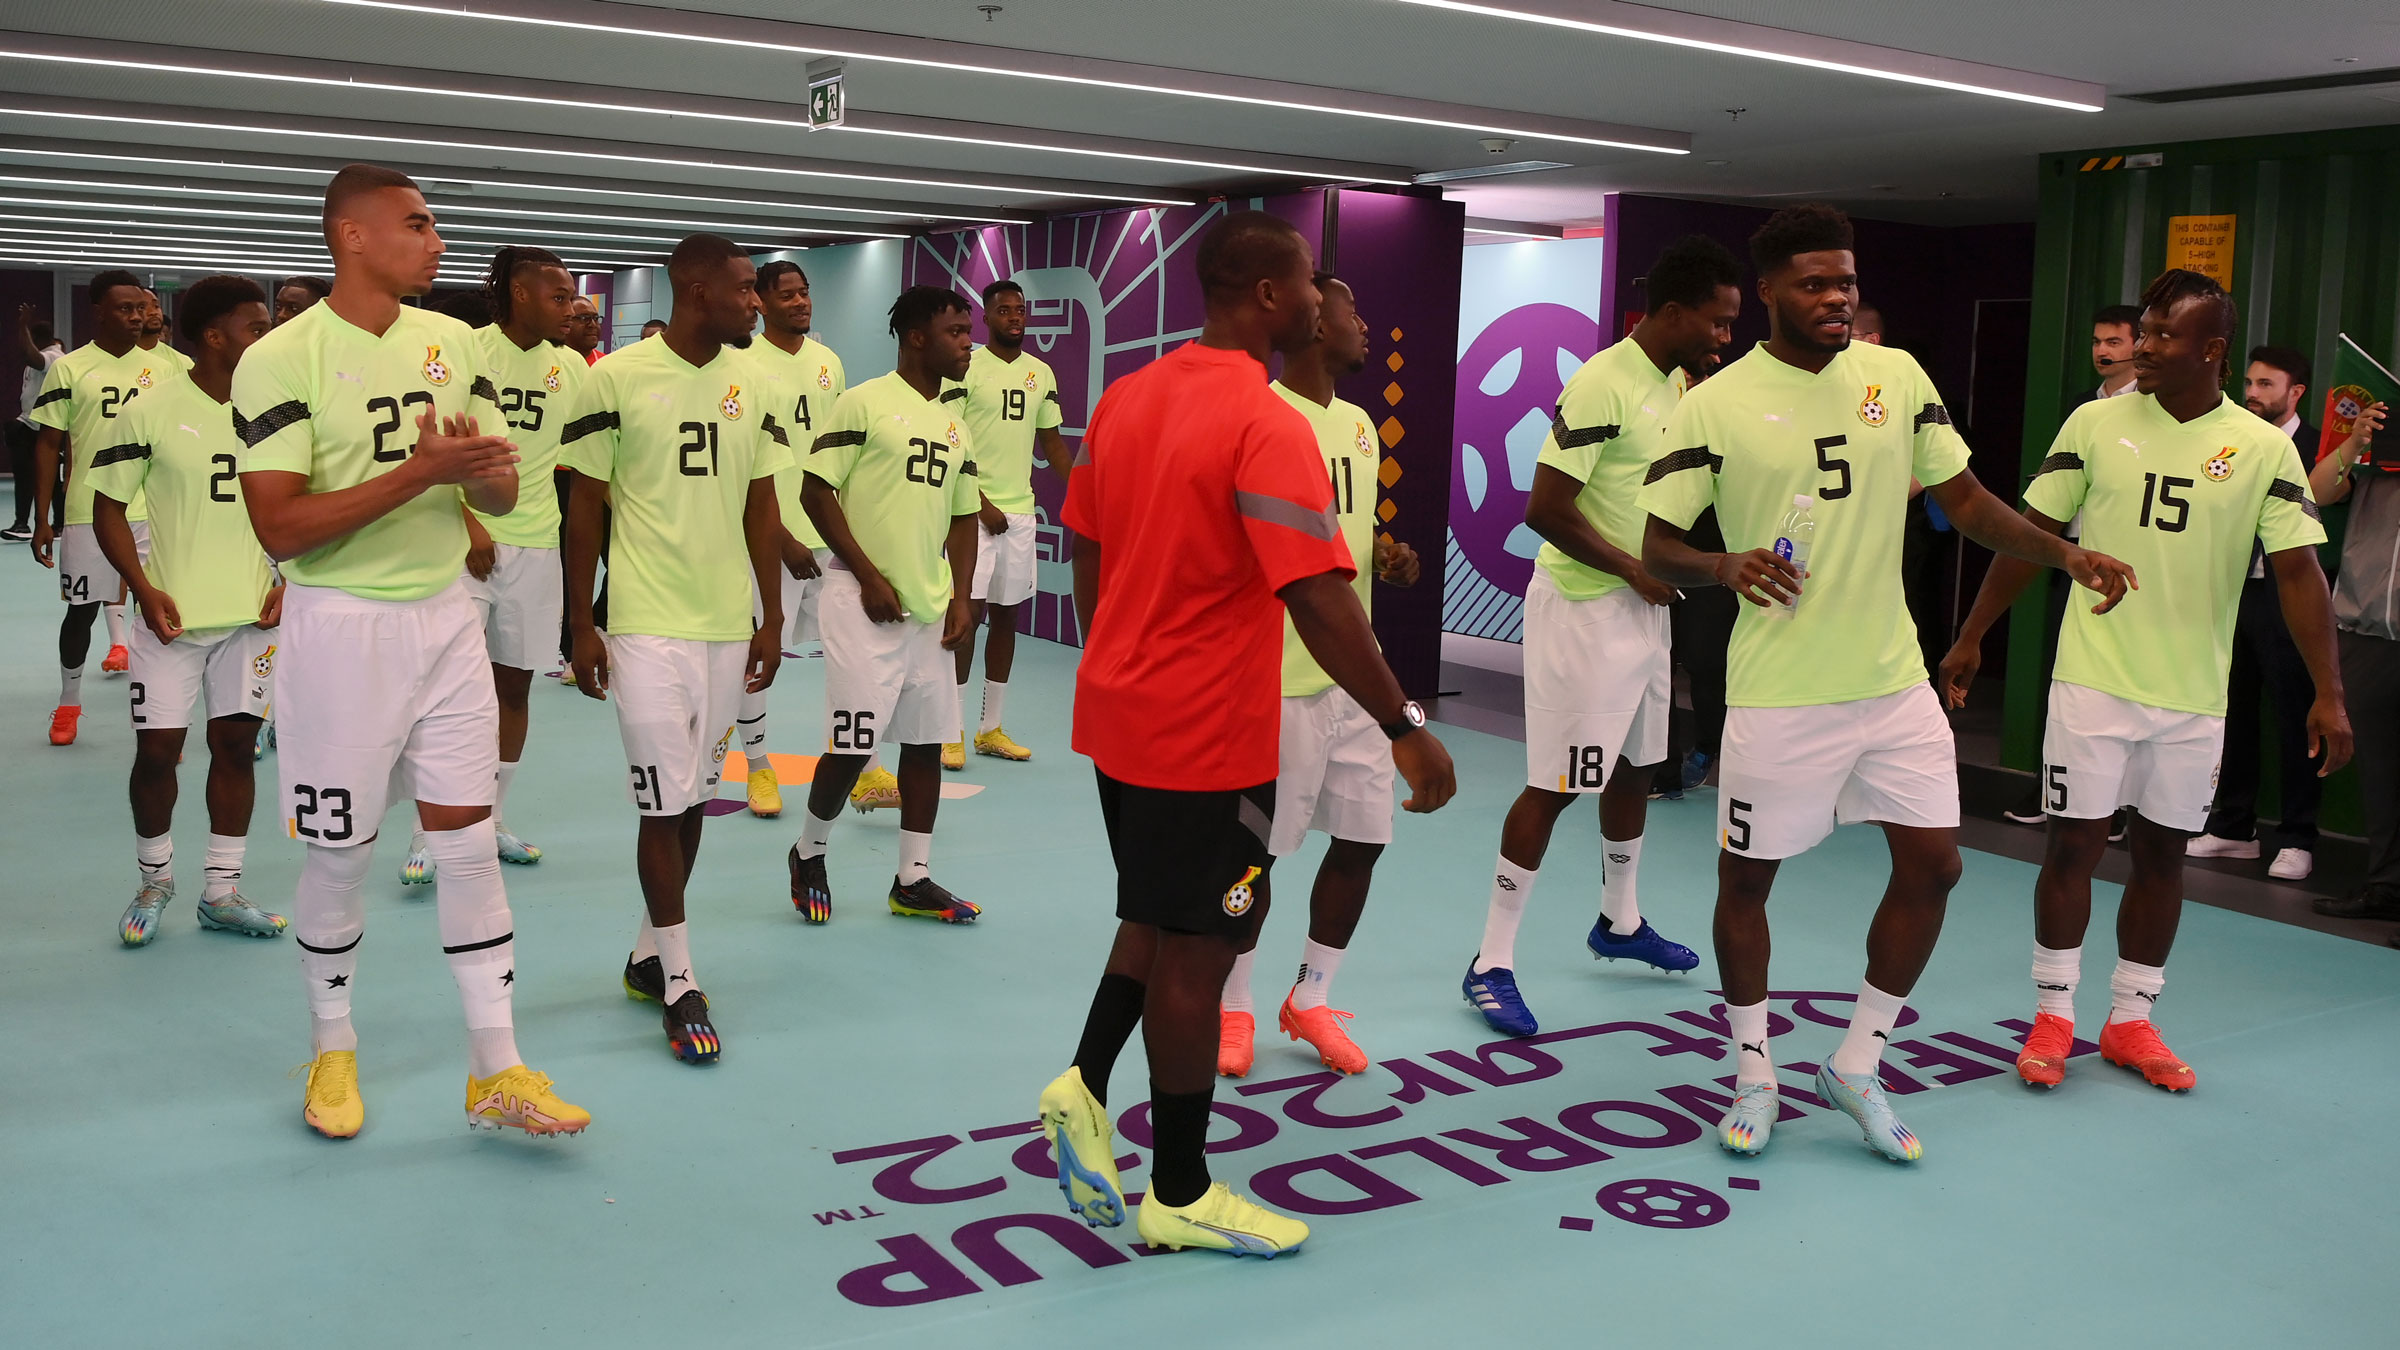 GUESS THE NATIONAL FOOTBALL TEAM FROM ITS PLAYERS' CLUBS. FOOTBALL QUIZ  2019 - GOAL24 - Ghana Latest Football News, Live Scores, Results -  GHANAsoccernet